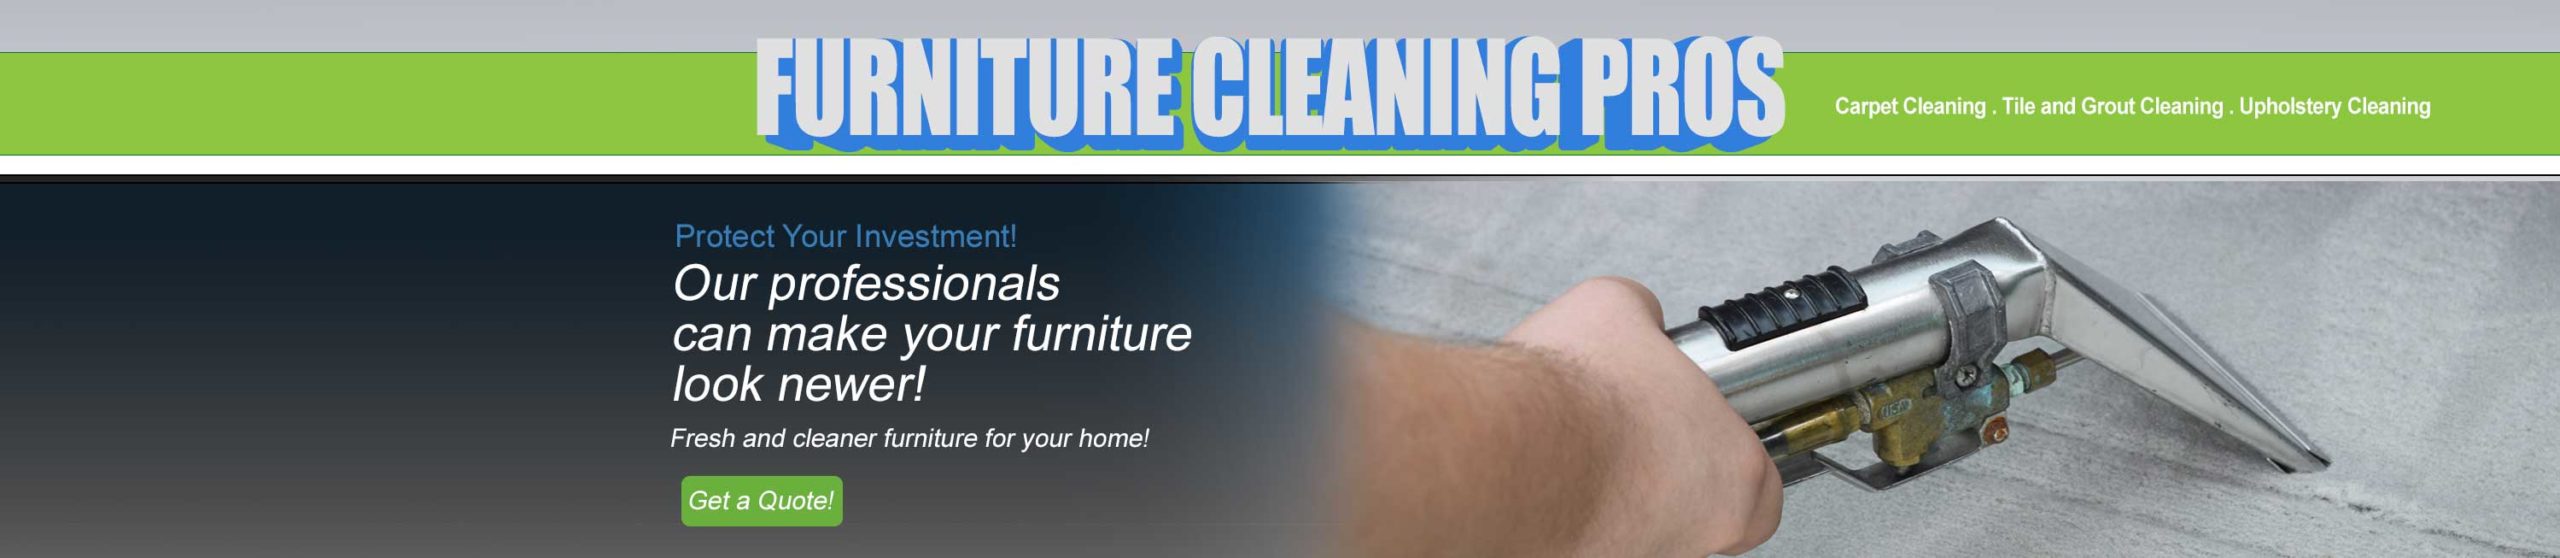 Furniture and upholstery cleaning in Gilbert AZ